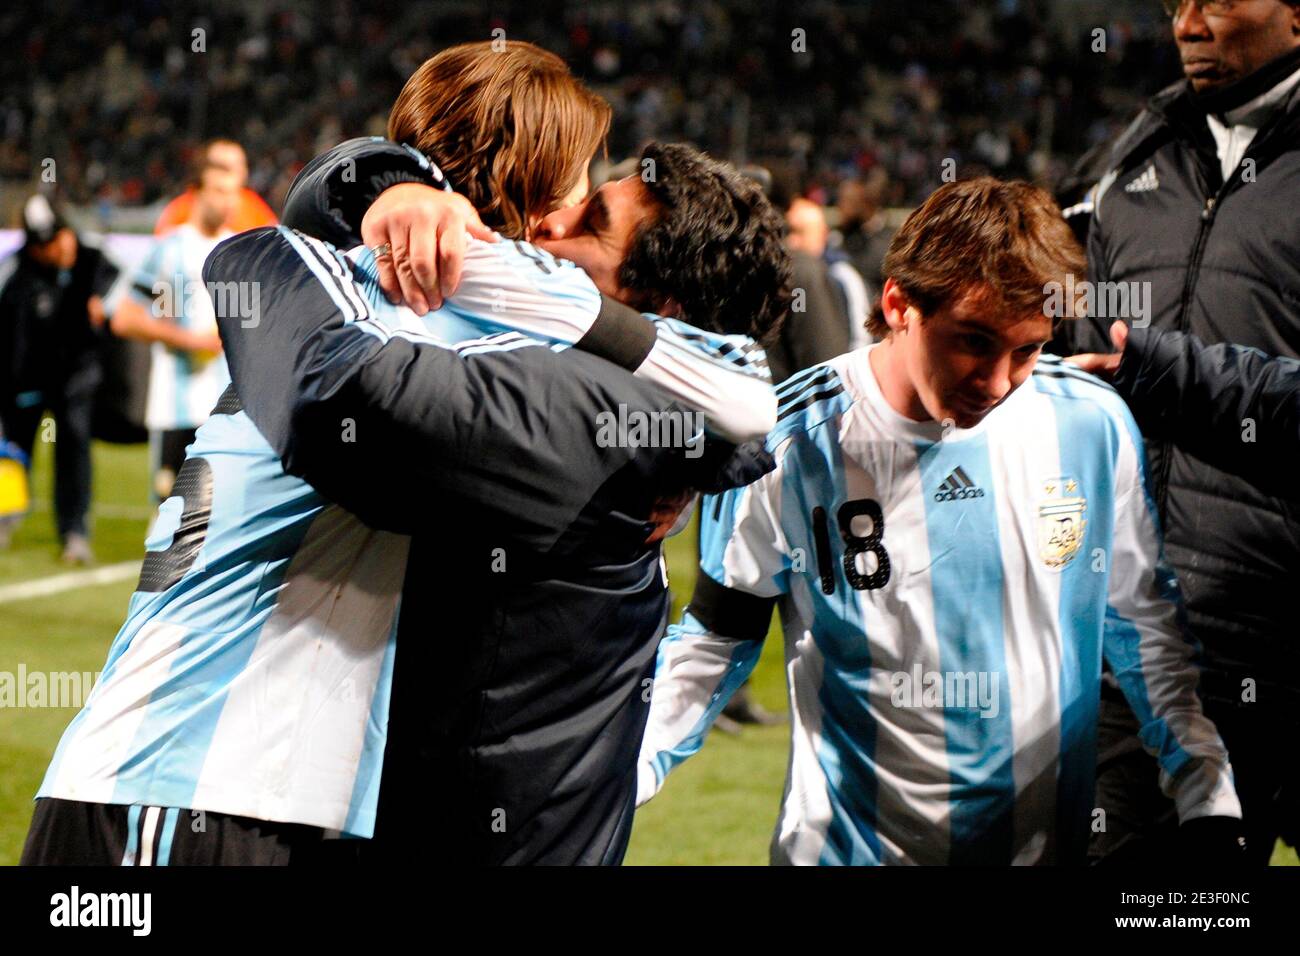 Diego Maradona, coach of Argentina congratulates Fernando Gago (Lionel Messi is seen on the right) during the friendly international soccer match France vs Argentina in Marseille, France on February 11, 2009.Argentina won 2-0. Photo by Henri Szwarc-Cameleon-ABACAPRESS.COM Stock Photo